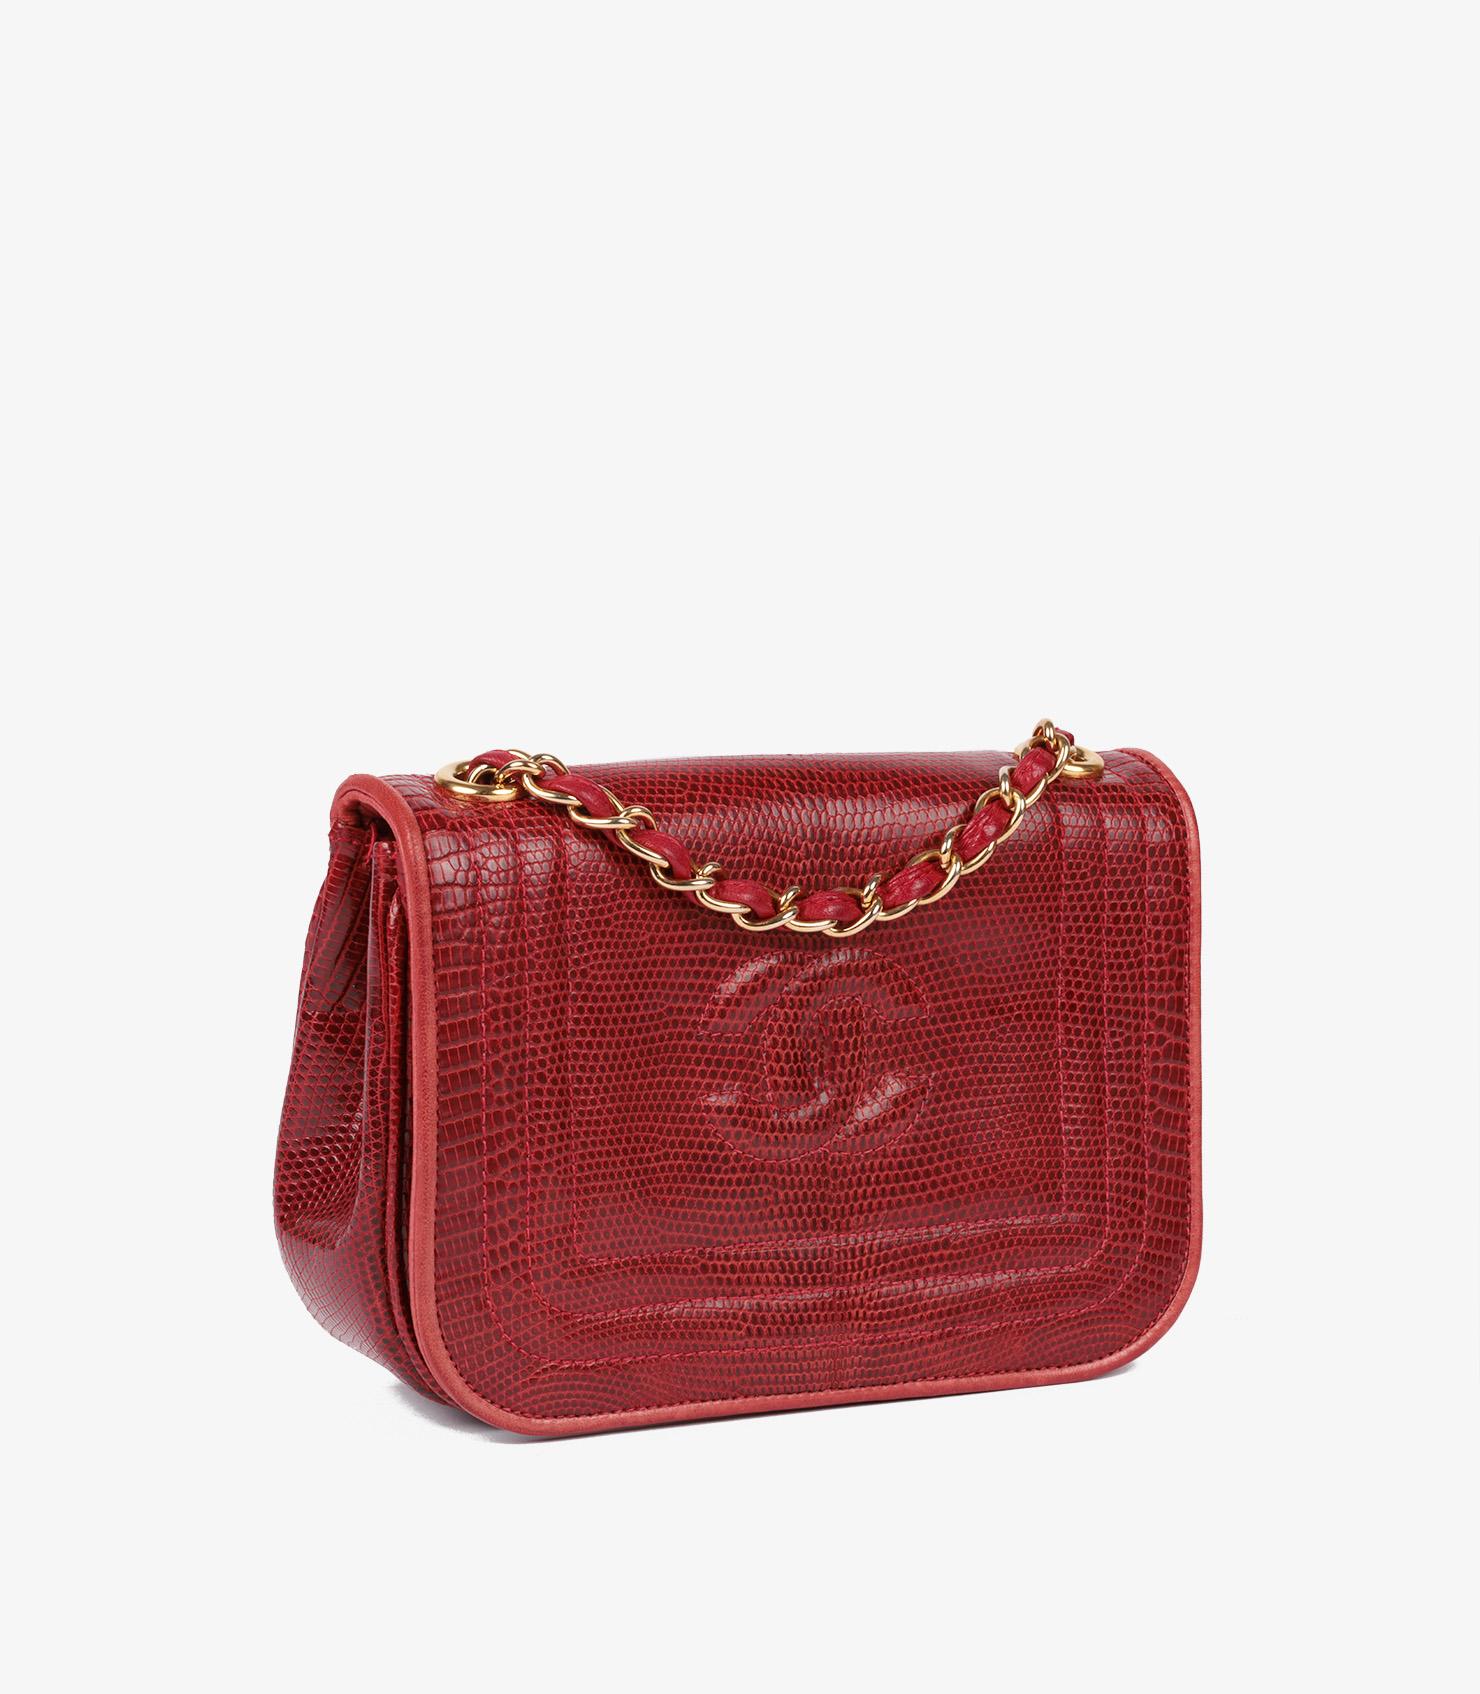 Chanel Red Lizard Leather Vintage Timeless Mini Flap Bag

Brand- Chanel
Model- Timeless Mini Flap Bag
Product Type- Crossbody, Shoulder
Serial Number- 89****
Age- Circa 1989
Accompanied By- Chanel Dust Bag, Box
Colour- Red
Hardware-